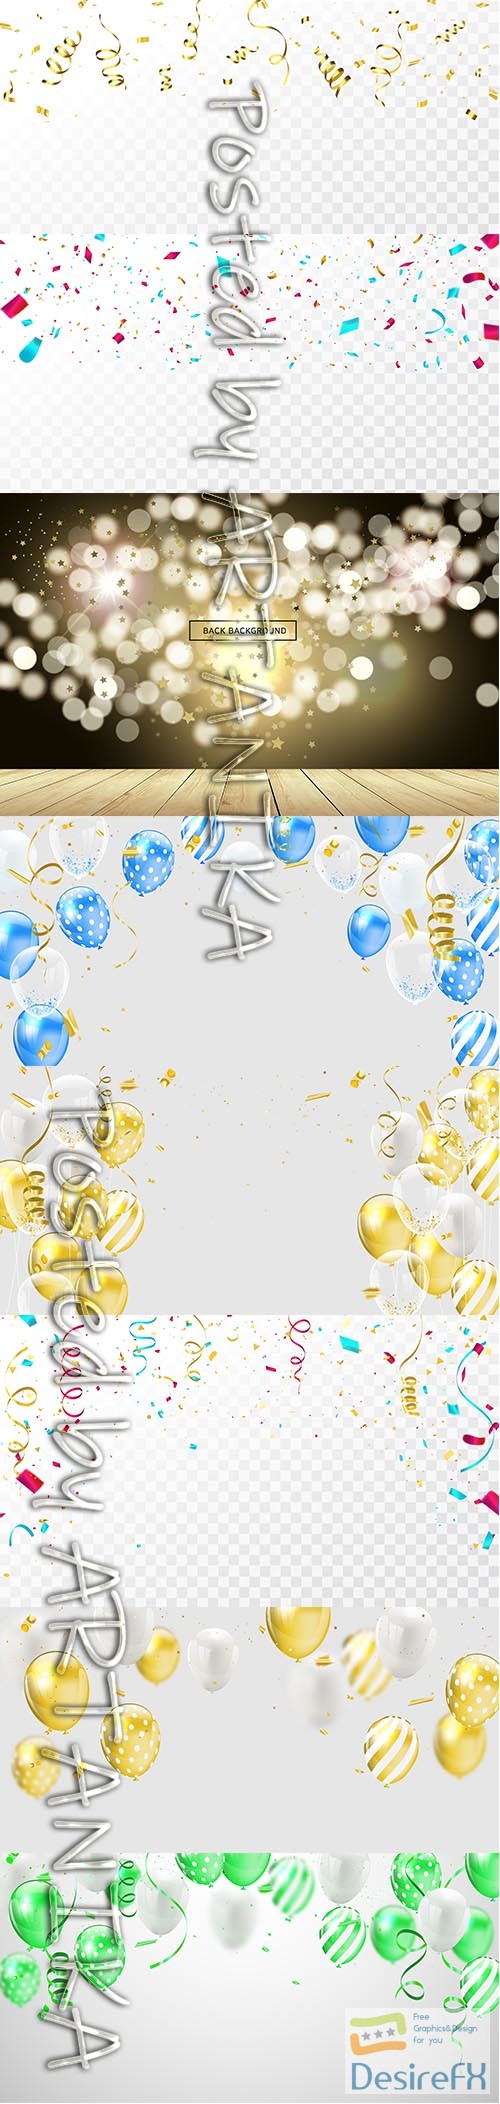 Colorful Confetti and Gold White Balloons Backgrounds